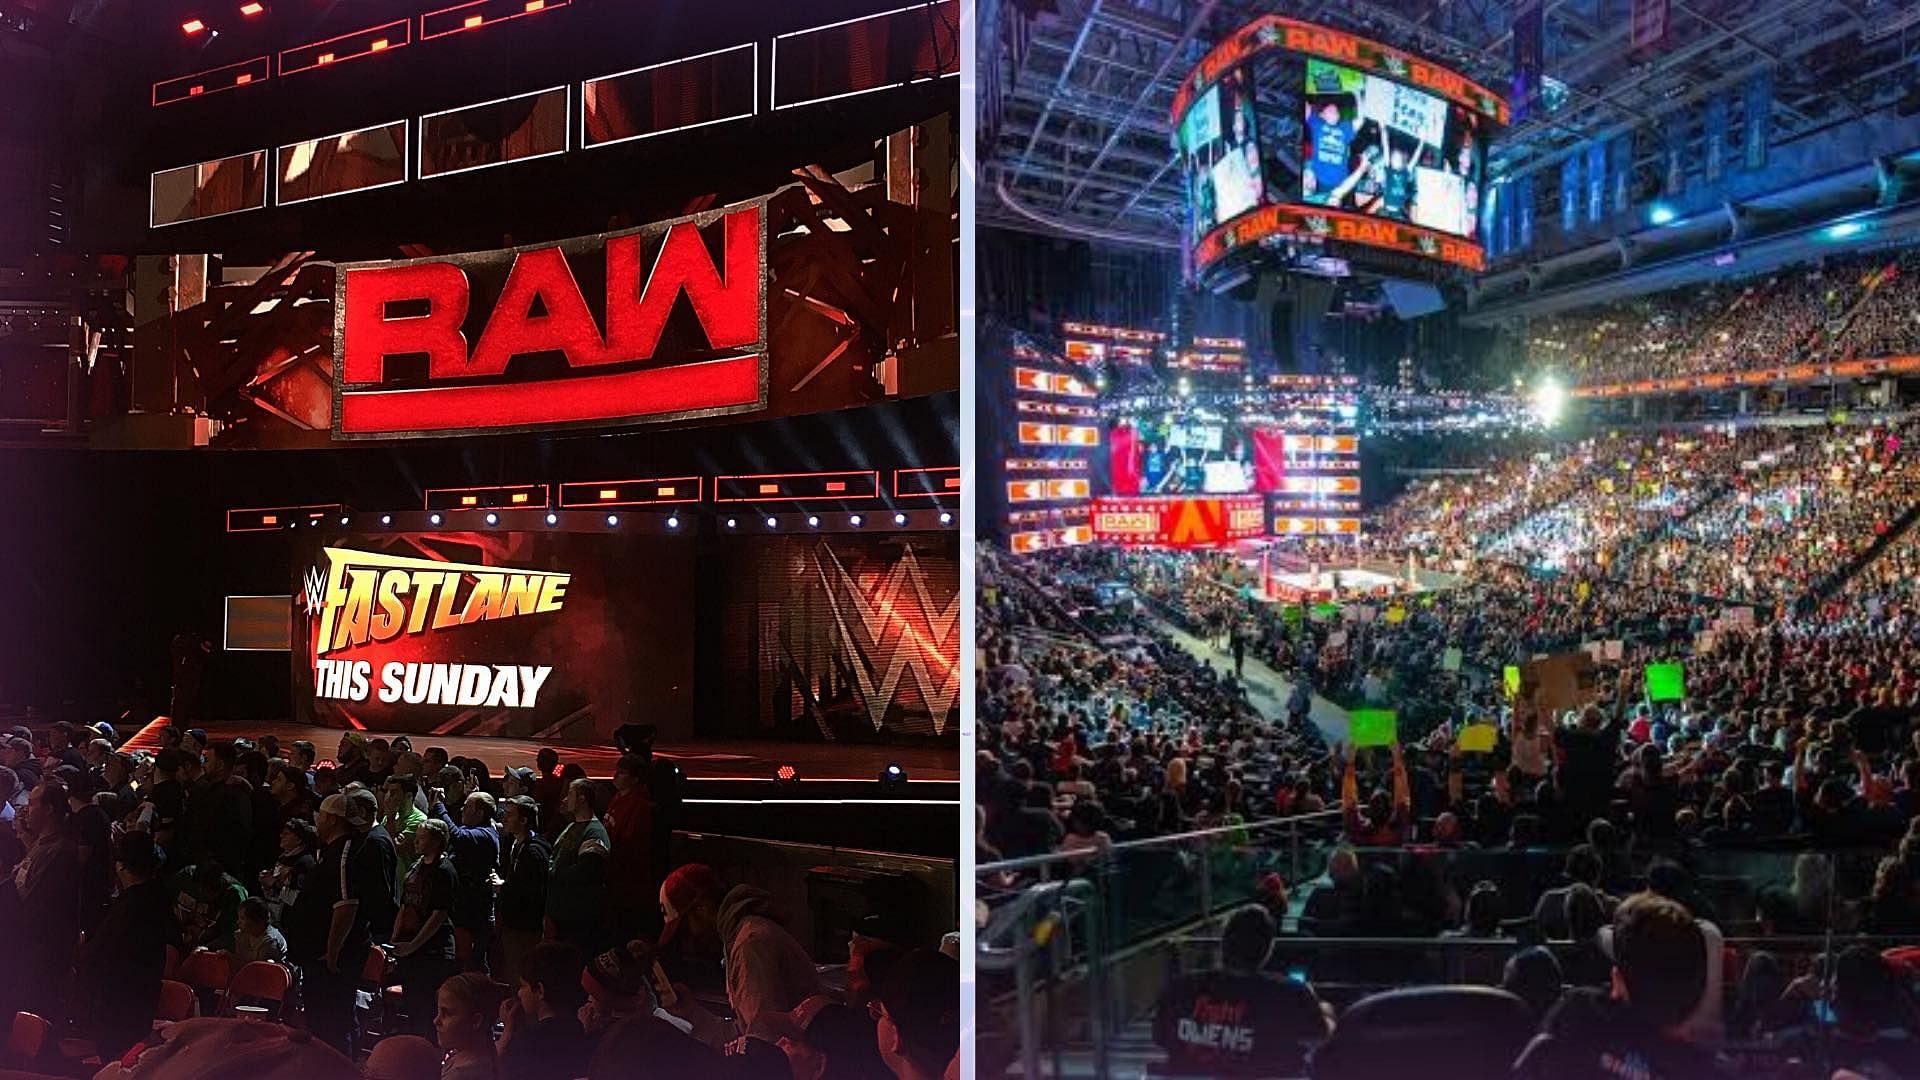 WWE RAW this week was live from the Delta Center in Salt Lake City, Utah